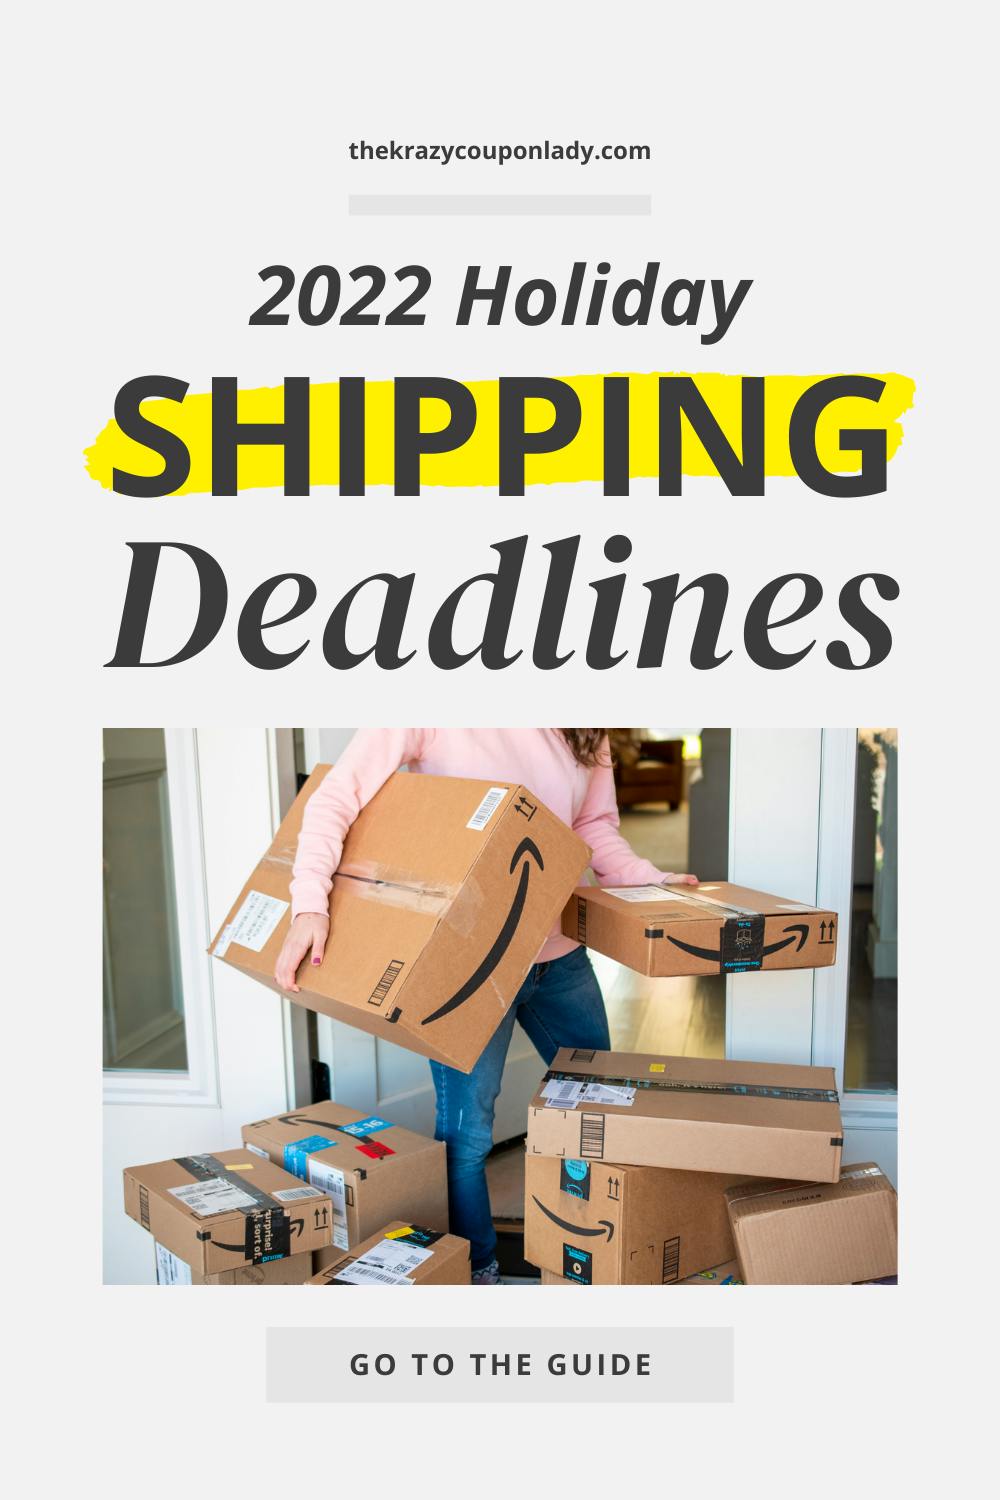 Holiday Shipping Deadlines 2022: Last Days You Can Shop Before Dec. 25